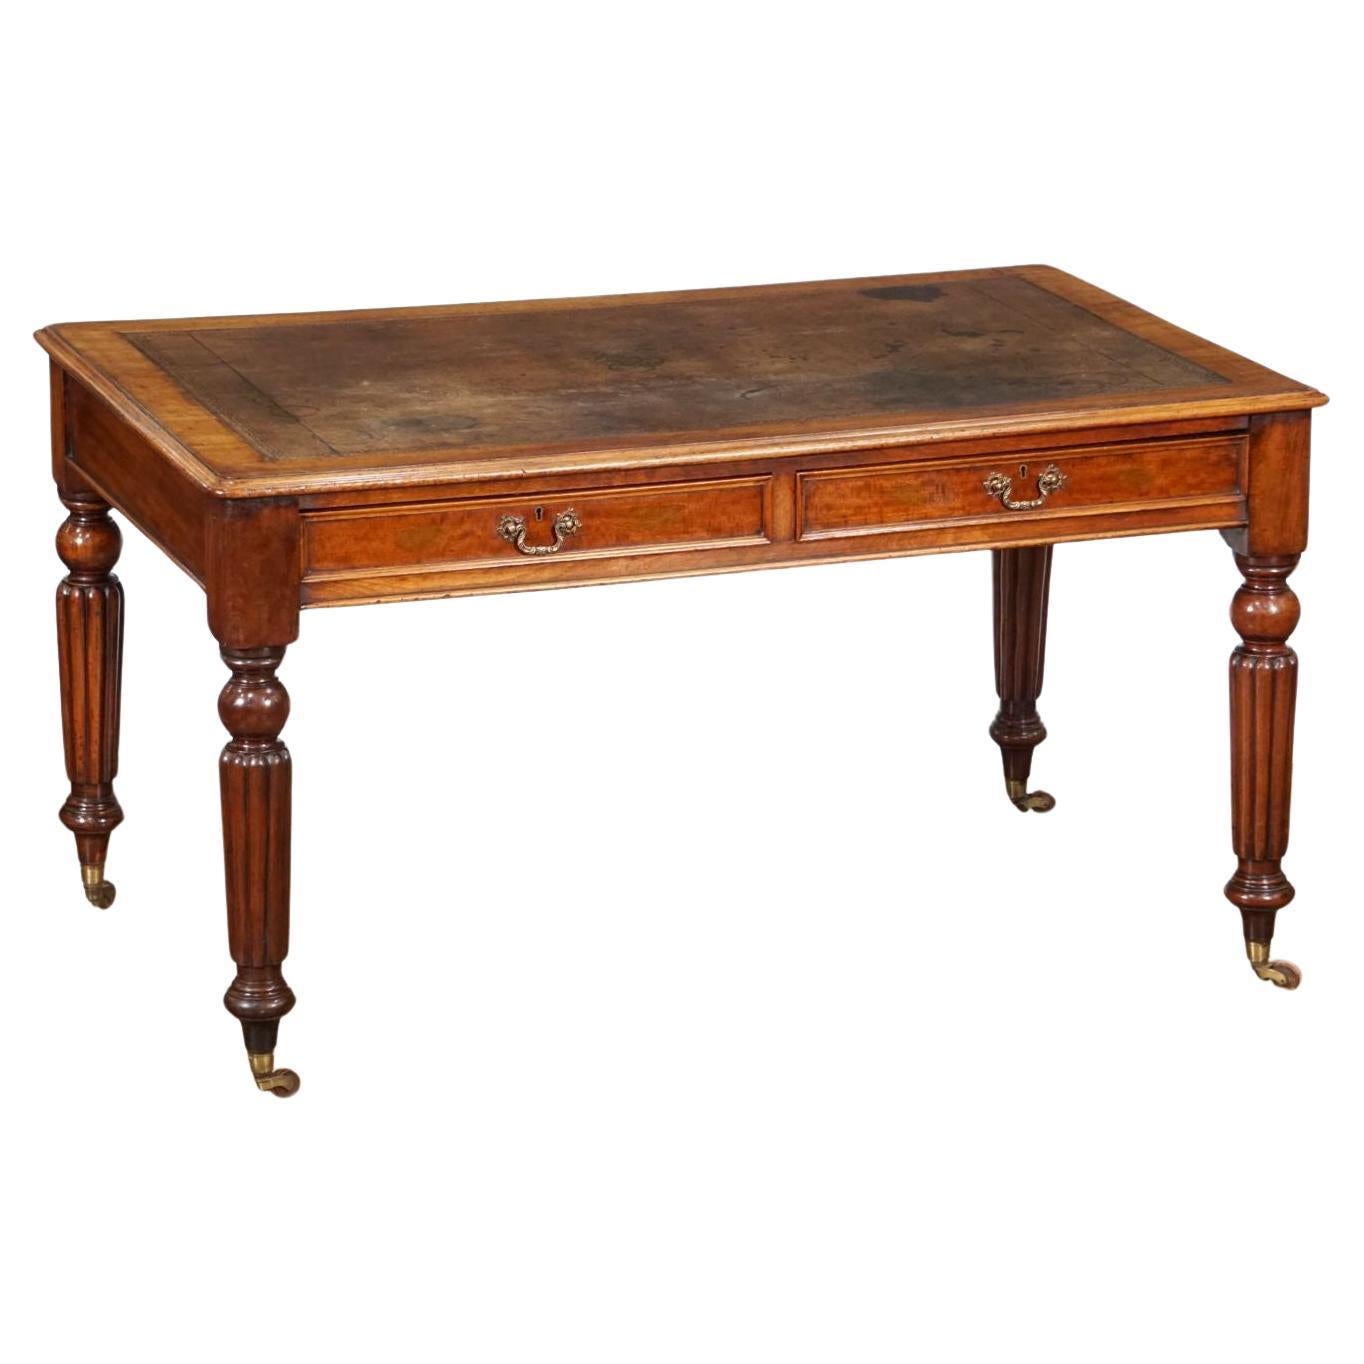 English Writing Table or Desk with Embossed Leather Top in the William IV Style For Sale